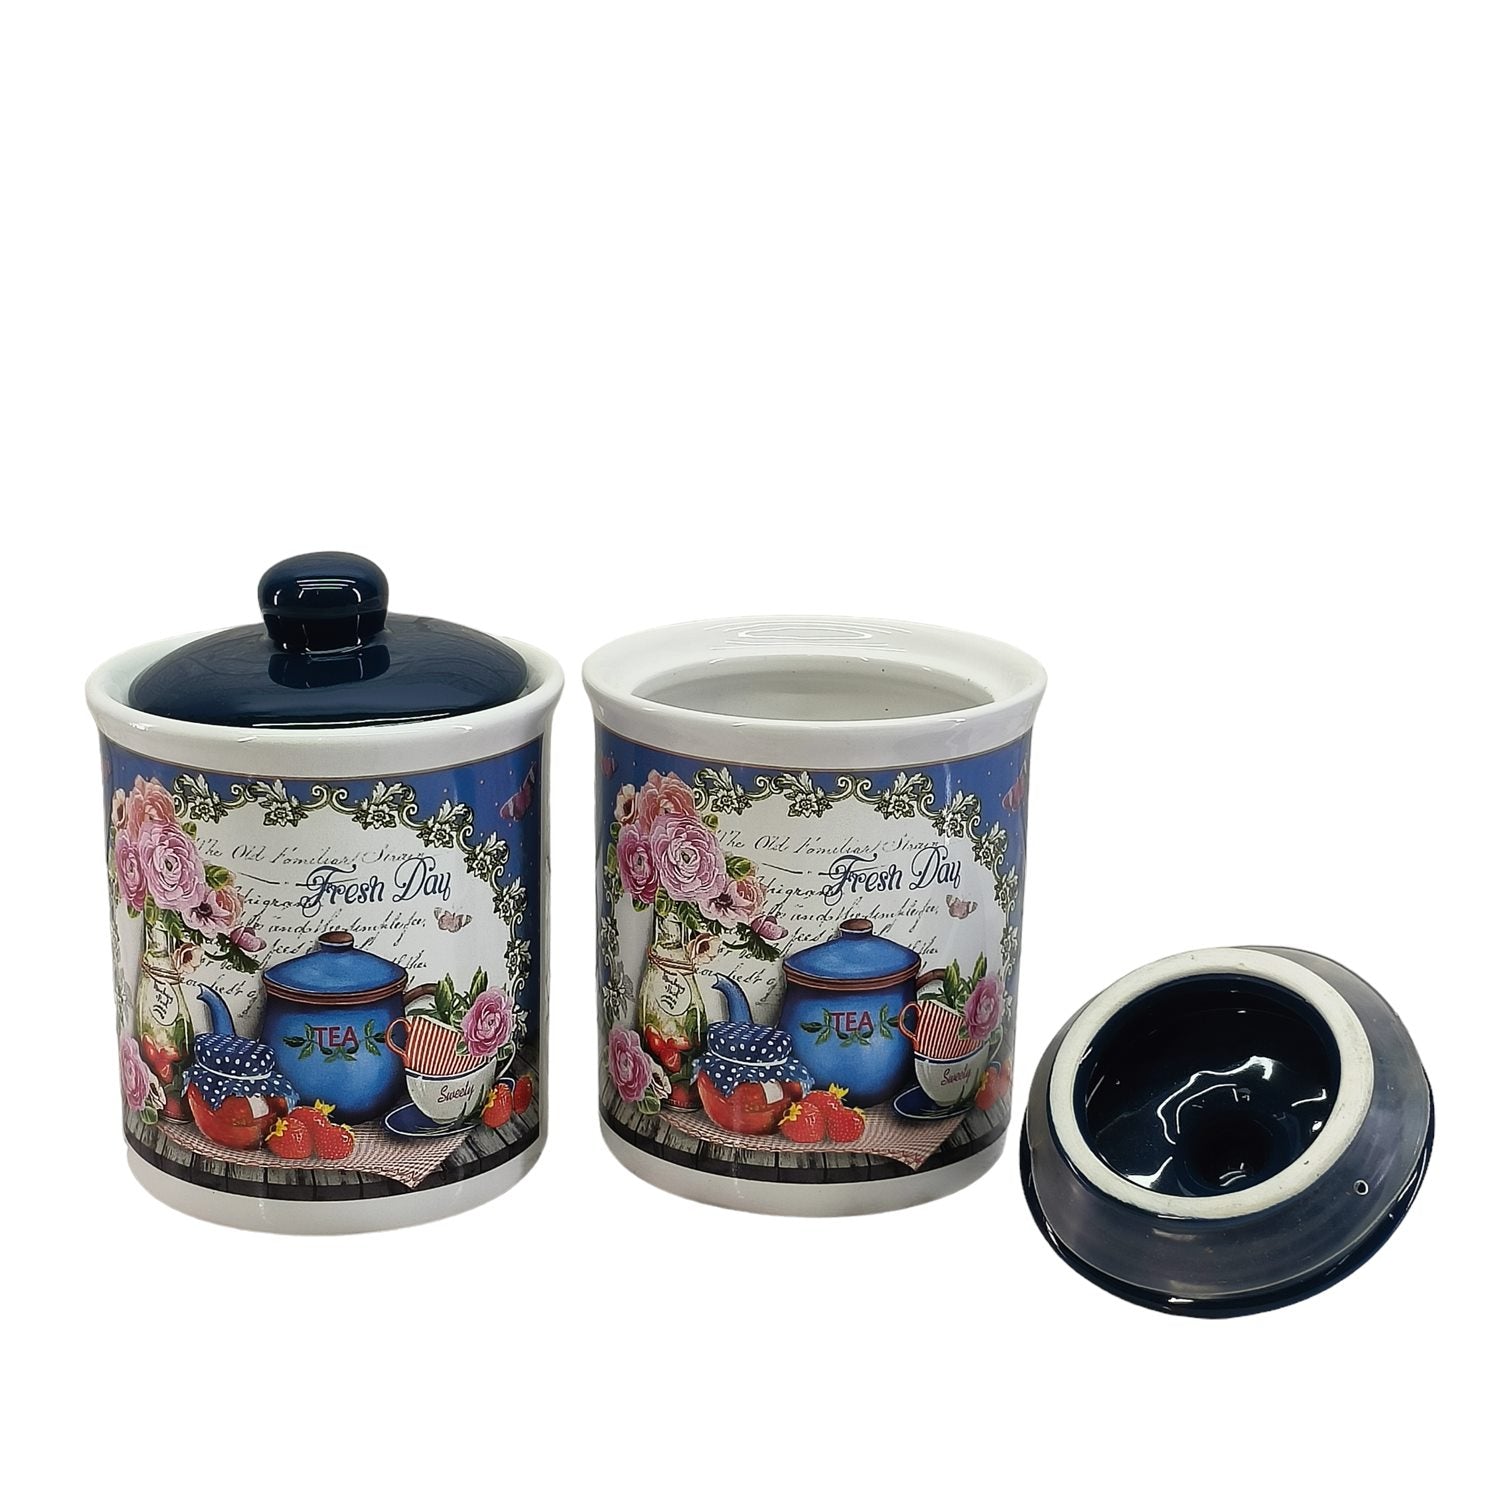 Ceramic Canister Jar Container Set of 2 for Home (C2002)